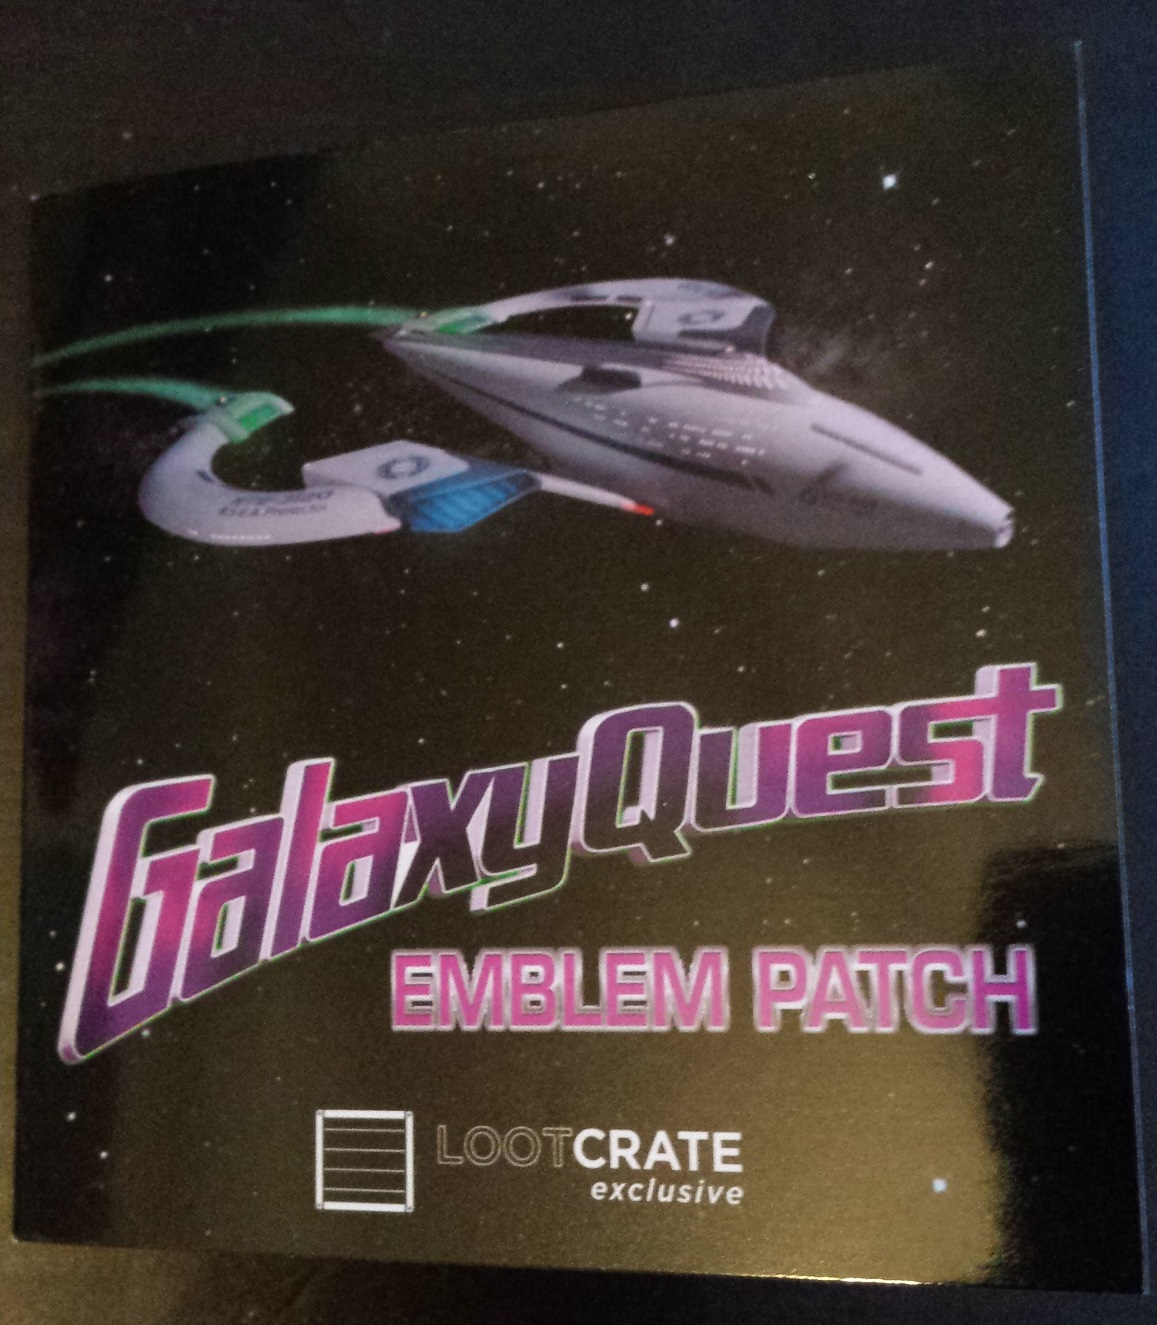 Galaxy quest emblem patch, loot crate, loot crate review, december loot crate, discovery loot crate